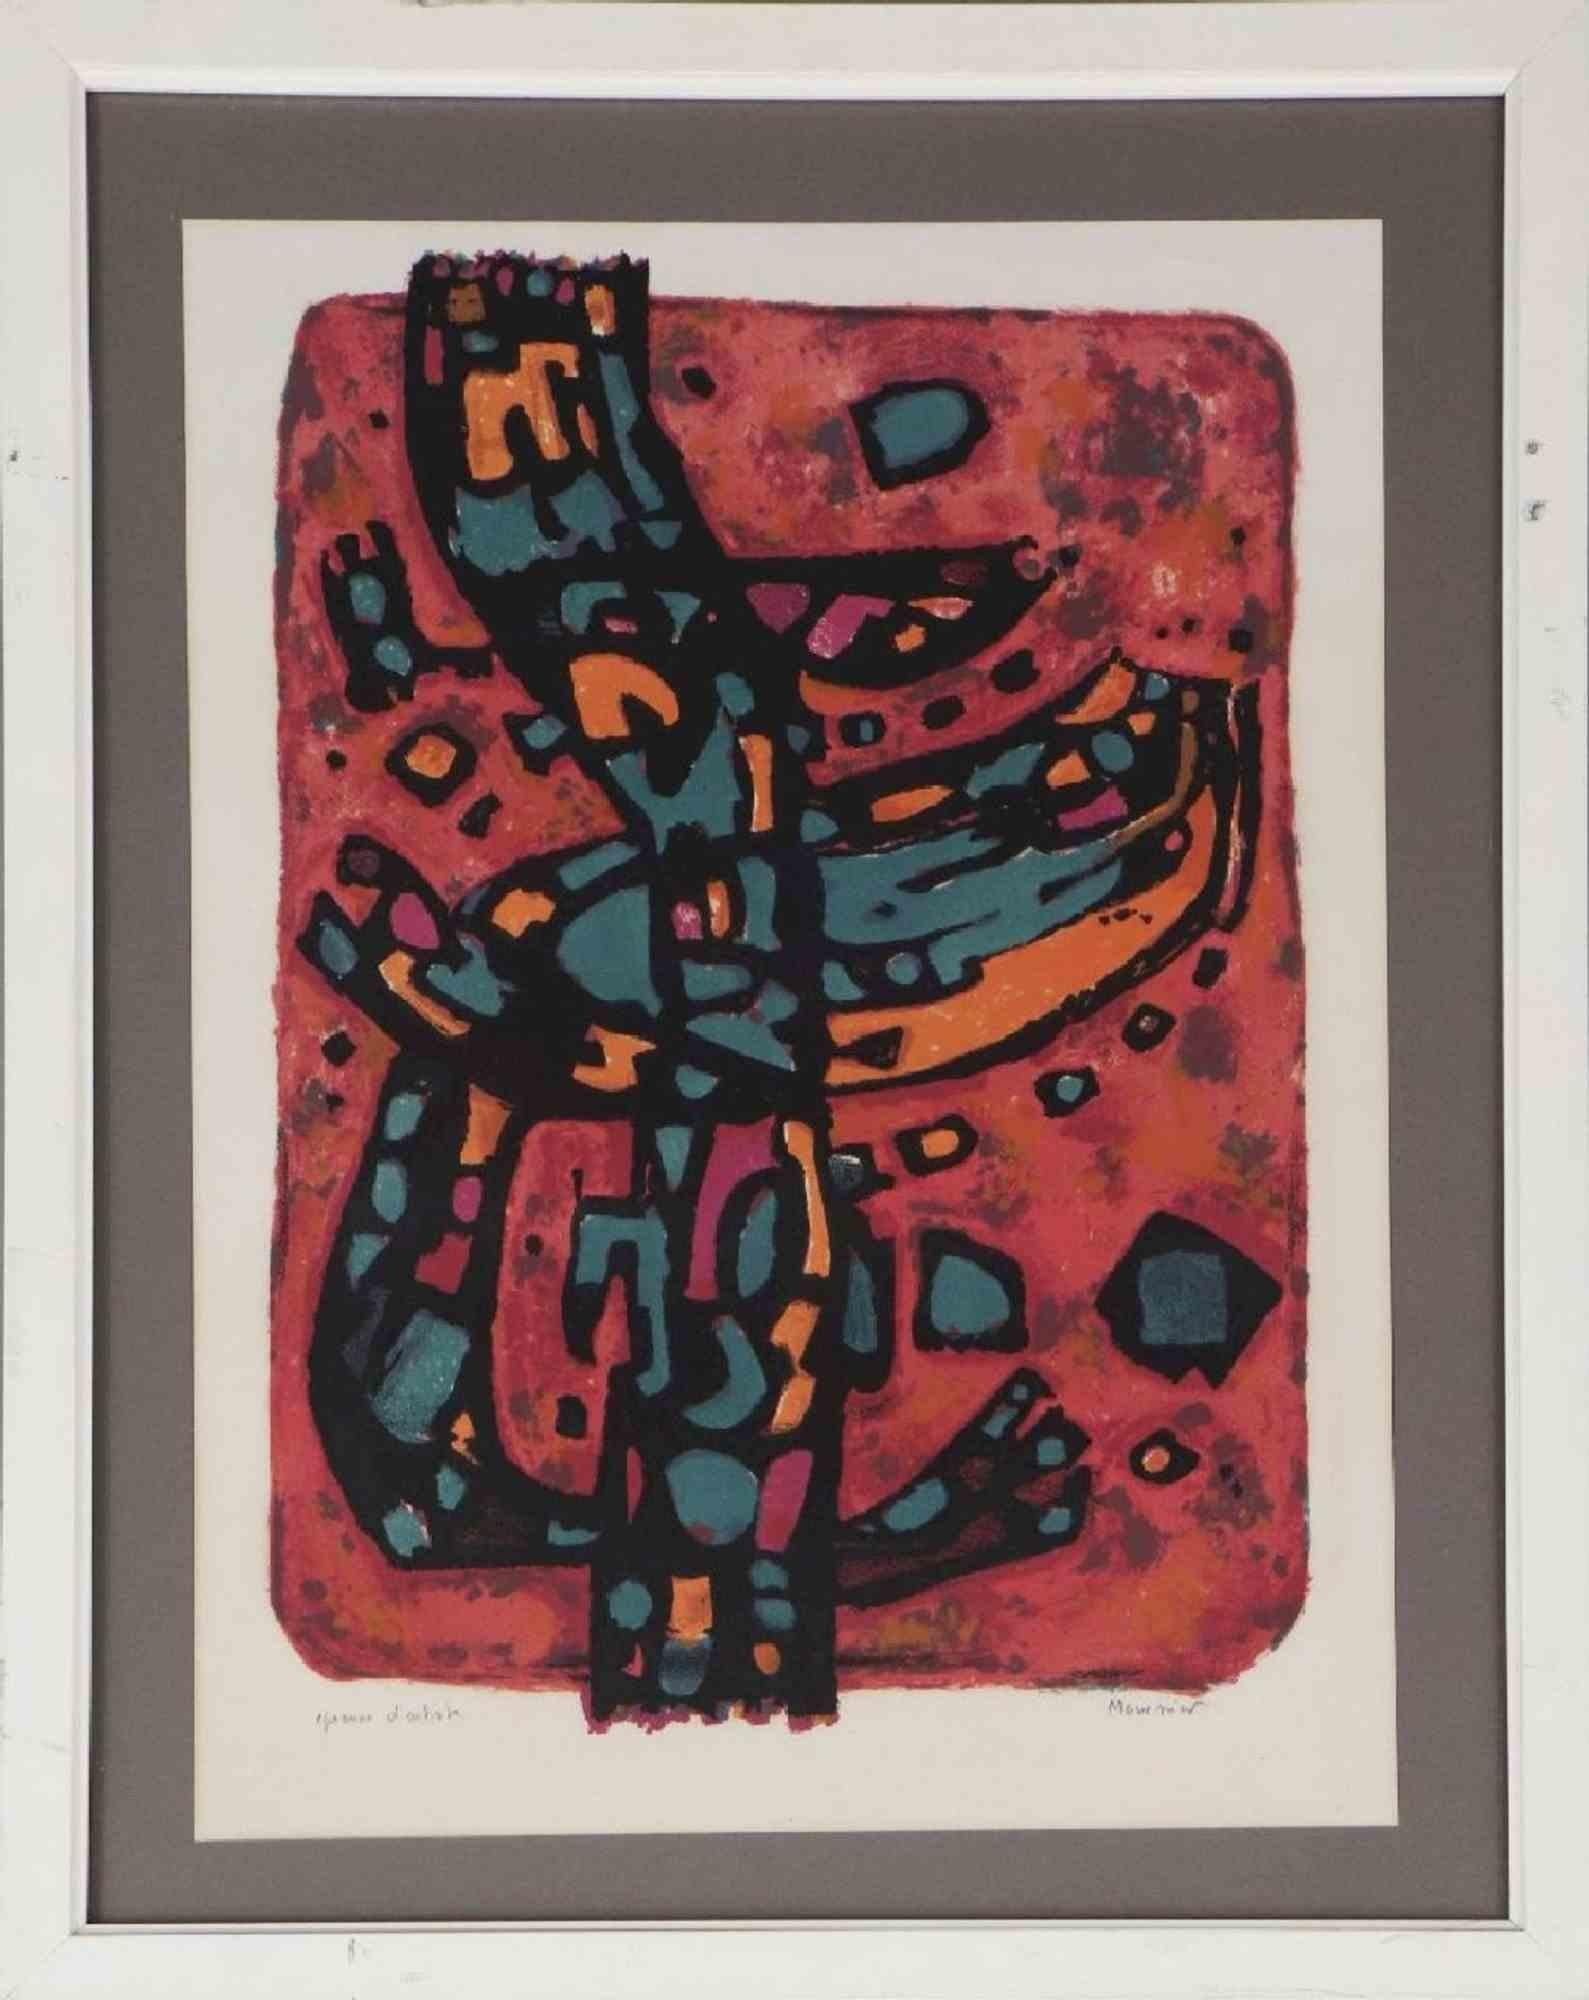 Alfred MANESSIER Abstract Print - Abstract Composition - Lithograph by Alfred Manessier- Mid 20th Century